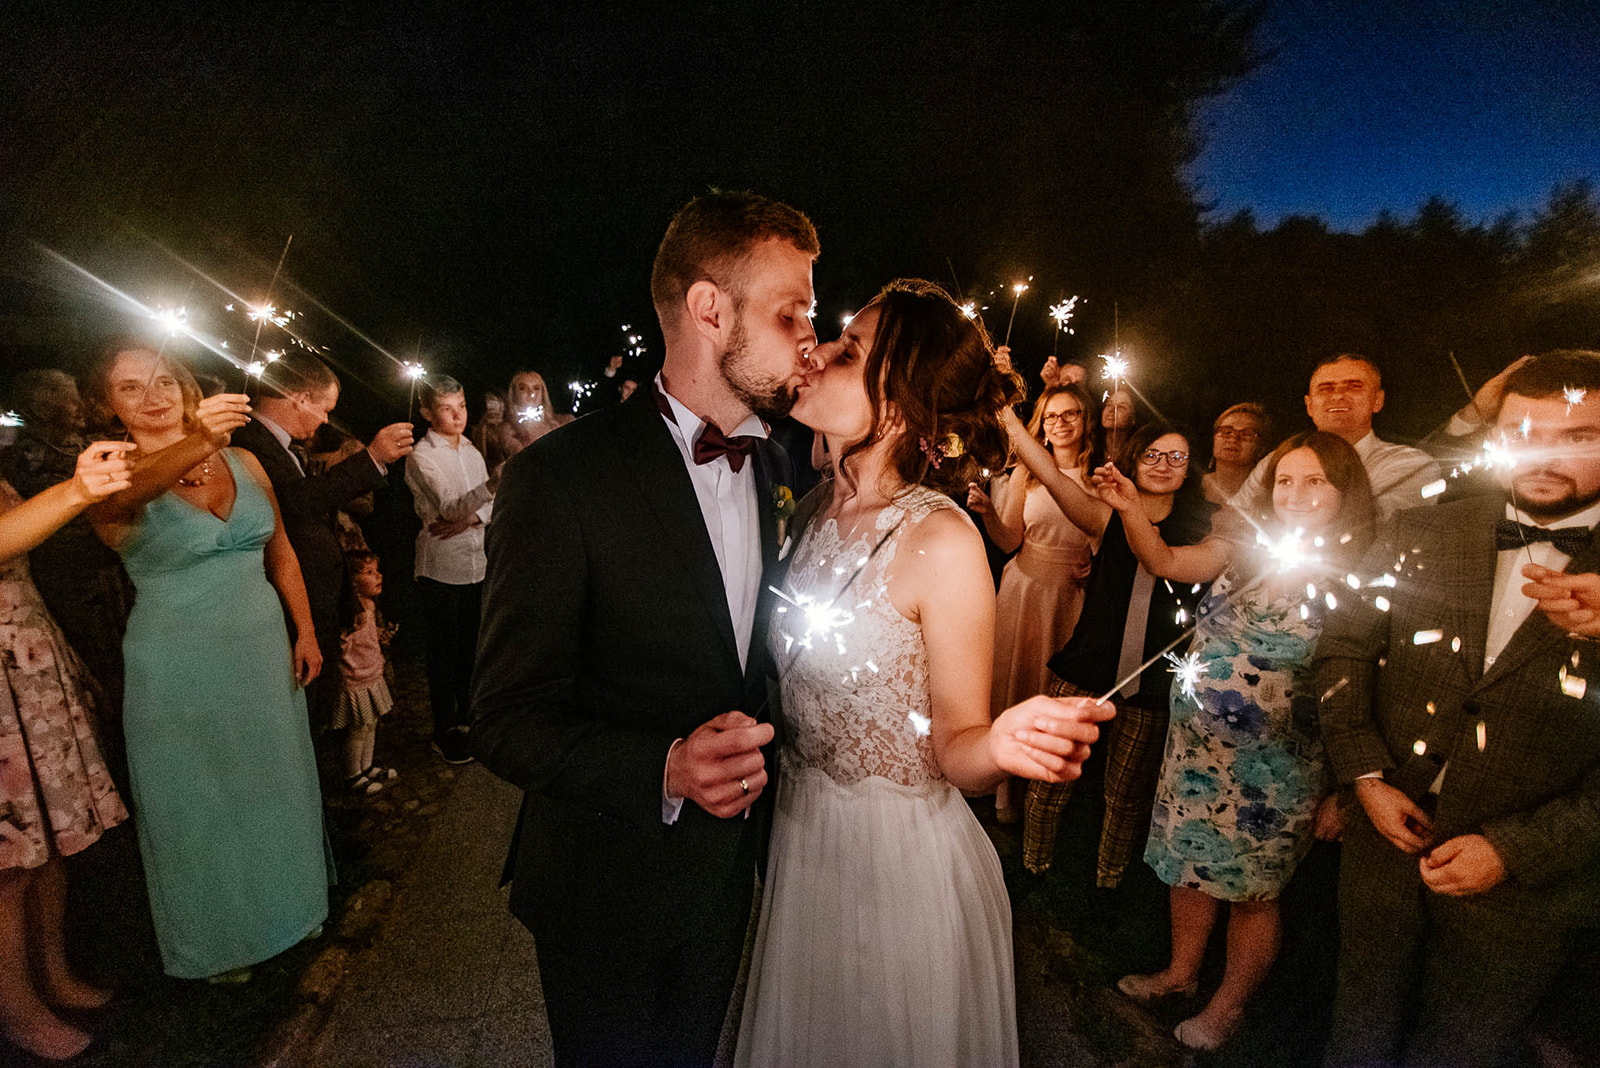 A wedding photo with sparklers